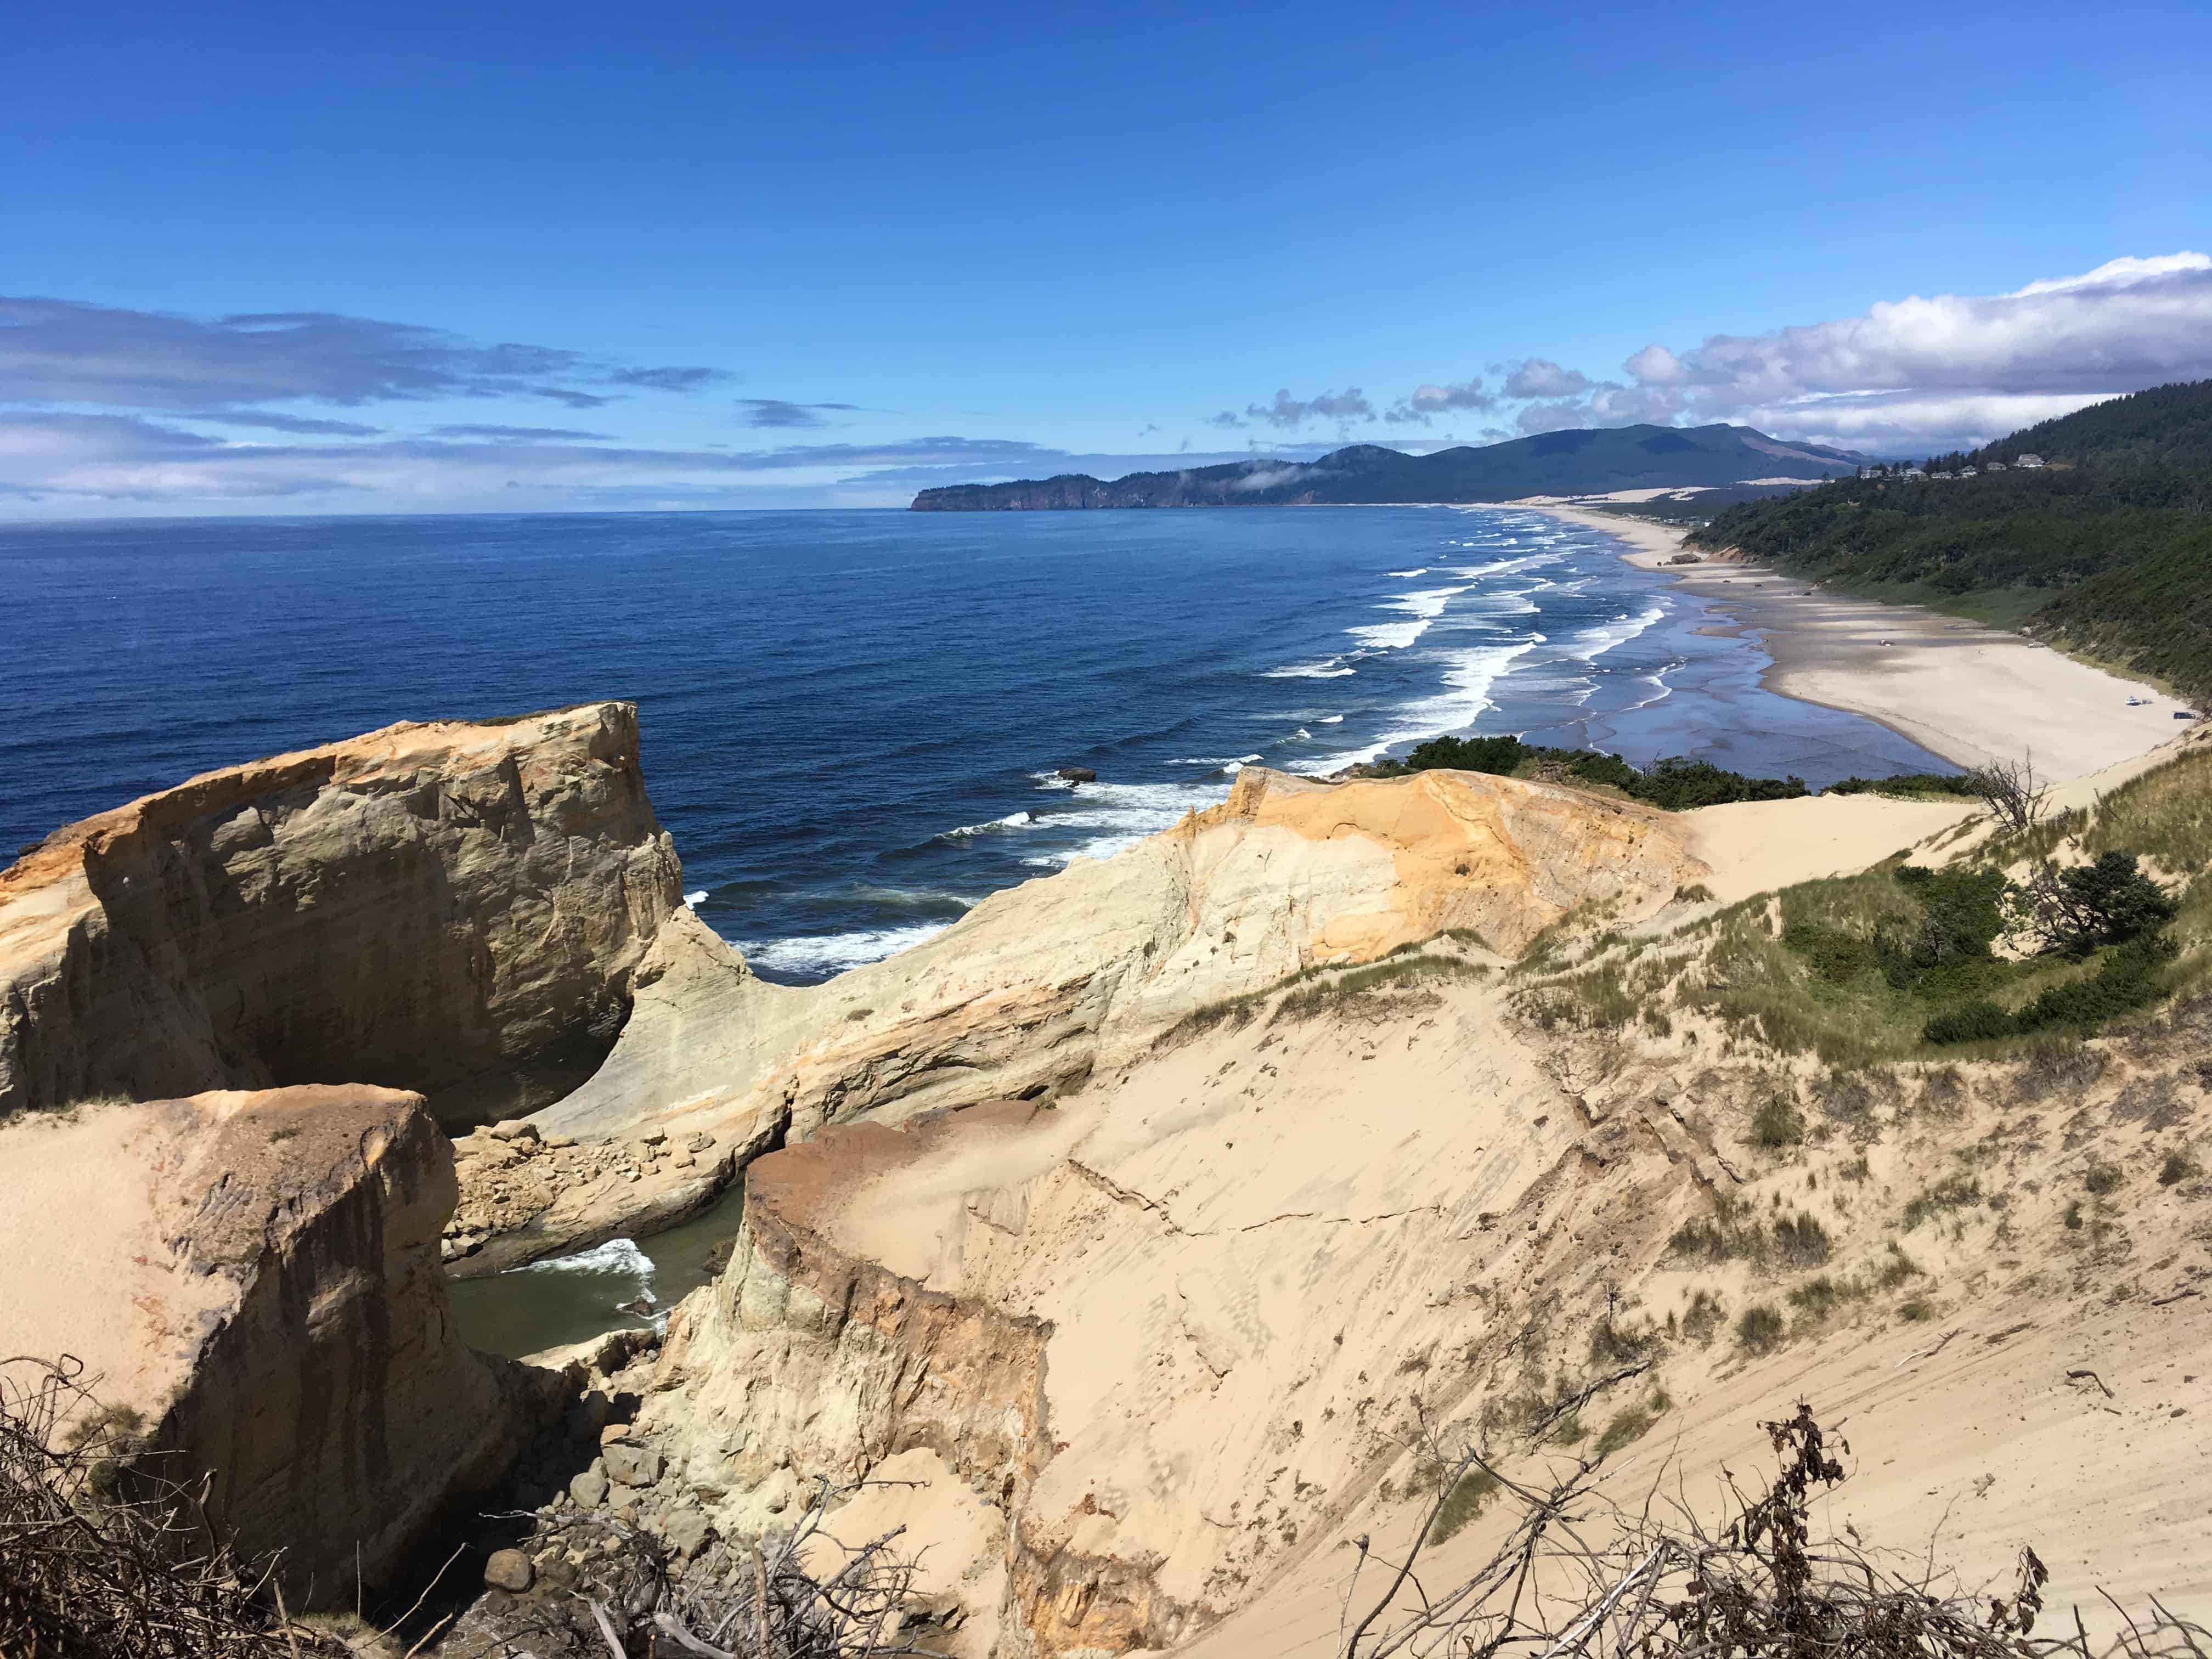 Beautiful bluffs and Oregon coastline. Visiting Pacific City, Oregon with kids is a great summer activity.